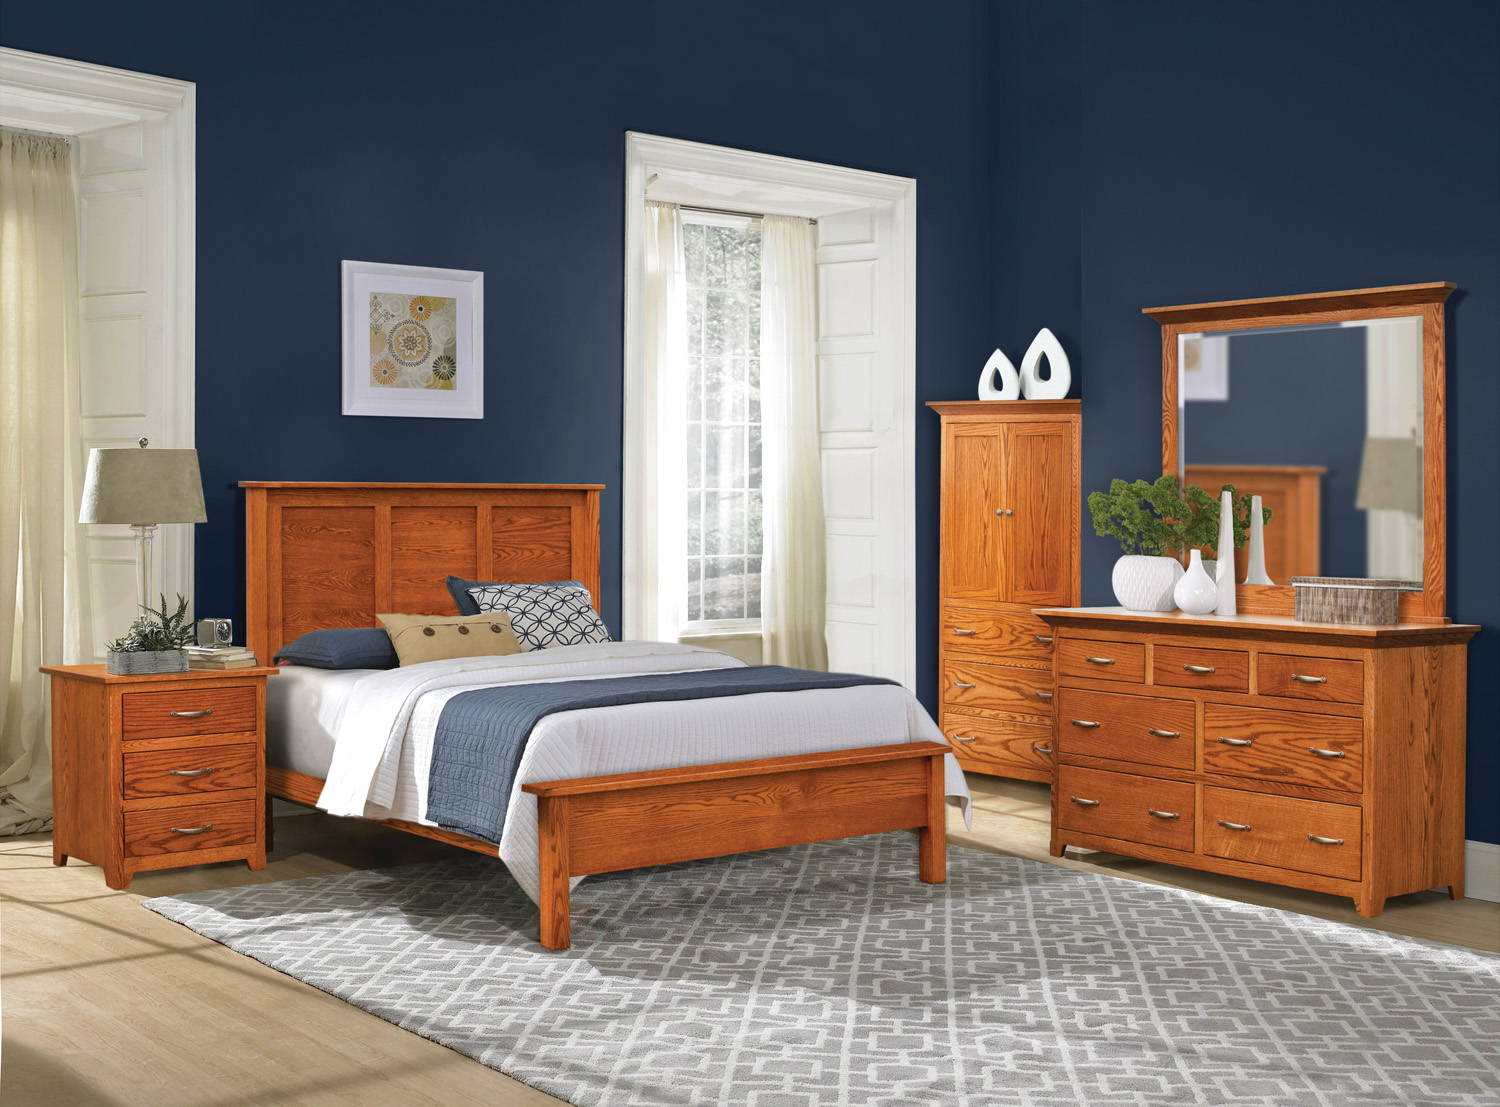 Image of fully customizable Shaker Bedroom Set through Harvest Home Interiors Amish Solid Wood Furniture